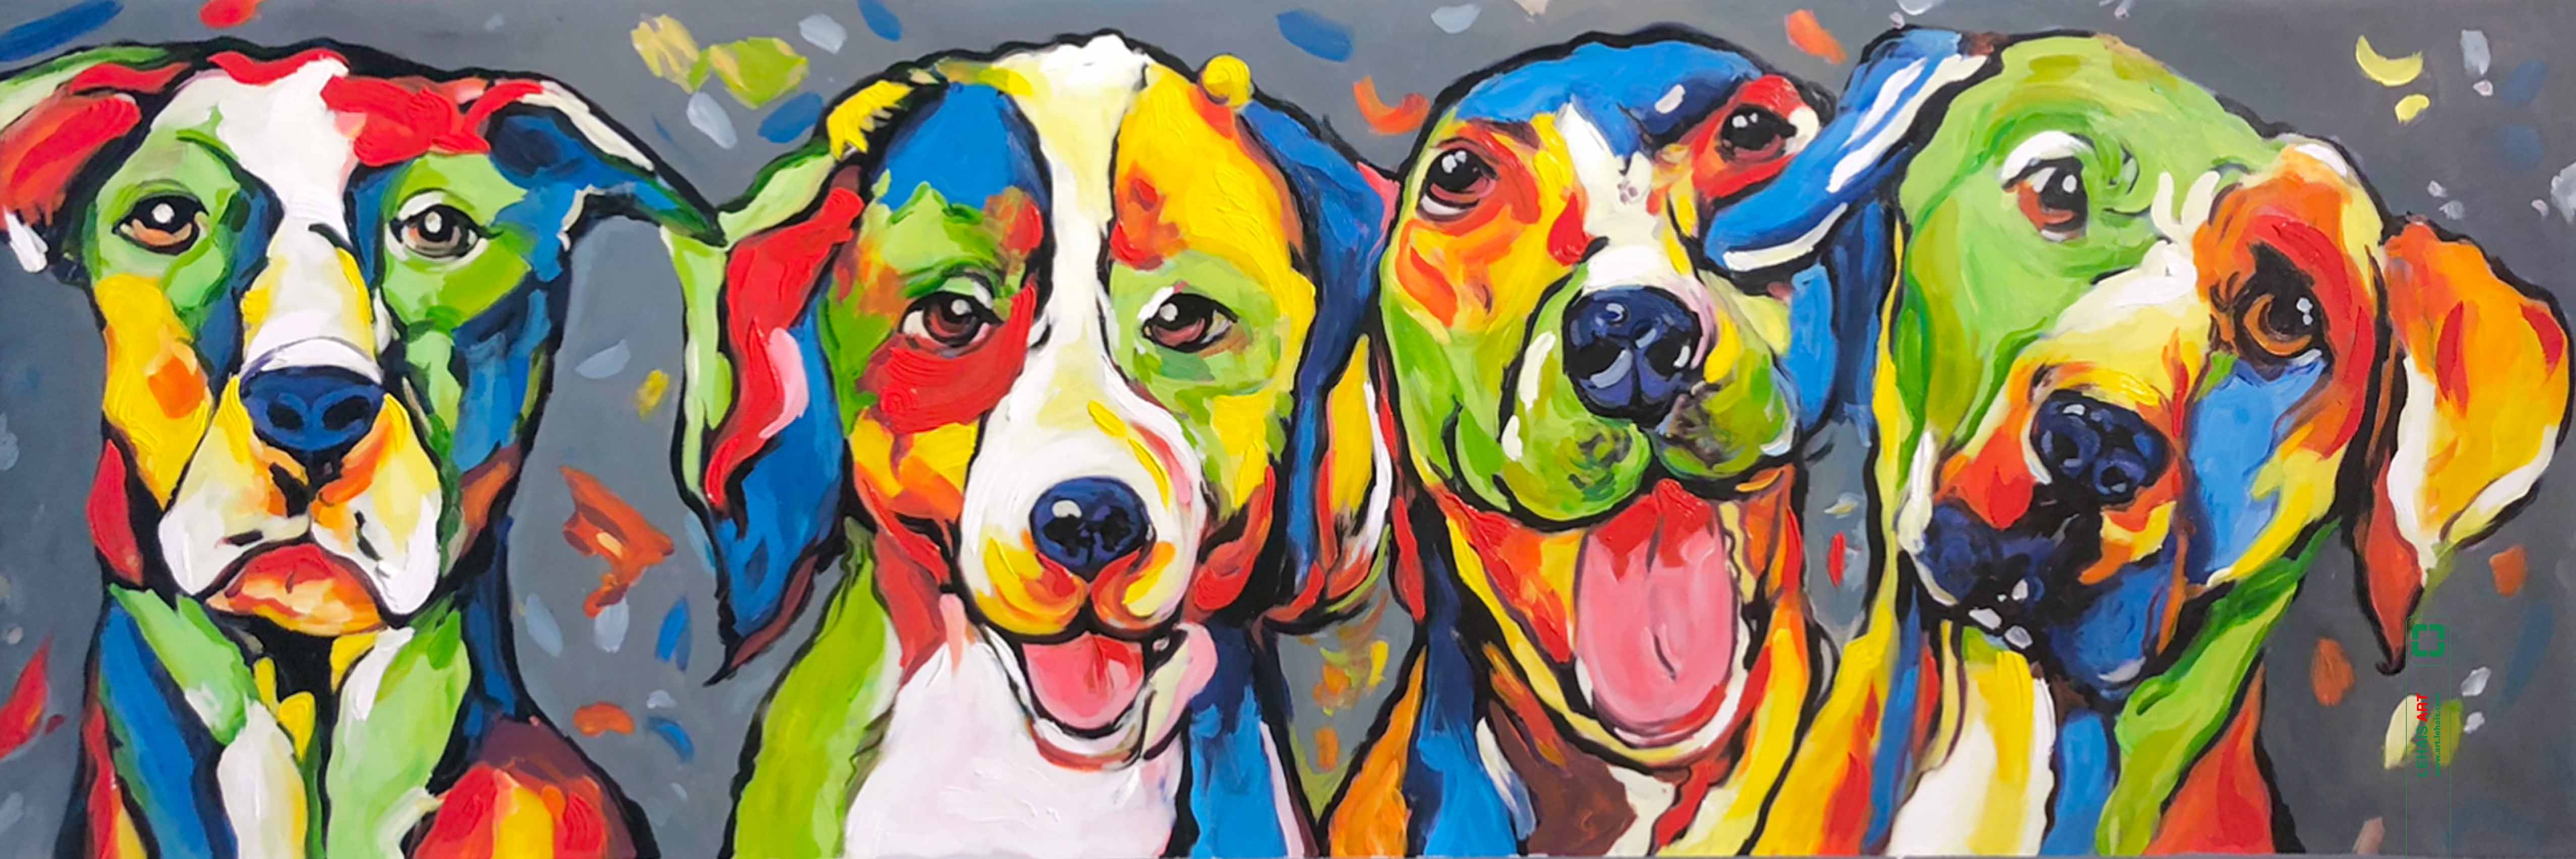 Oil painting of funny dogs in modern style - TSD771LHAR